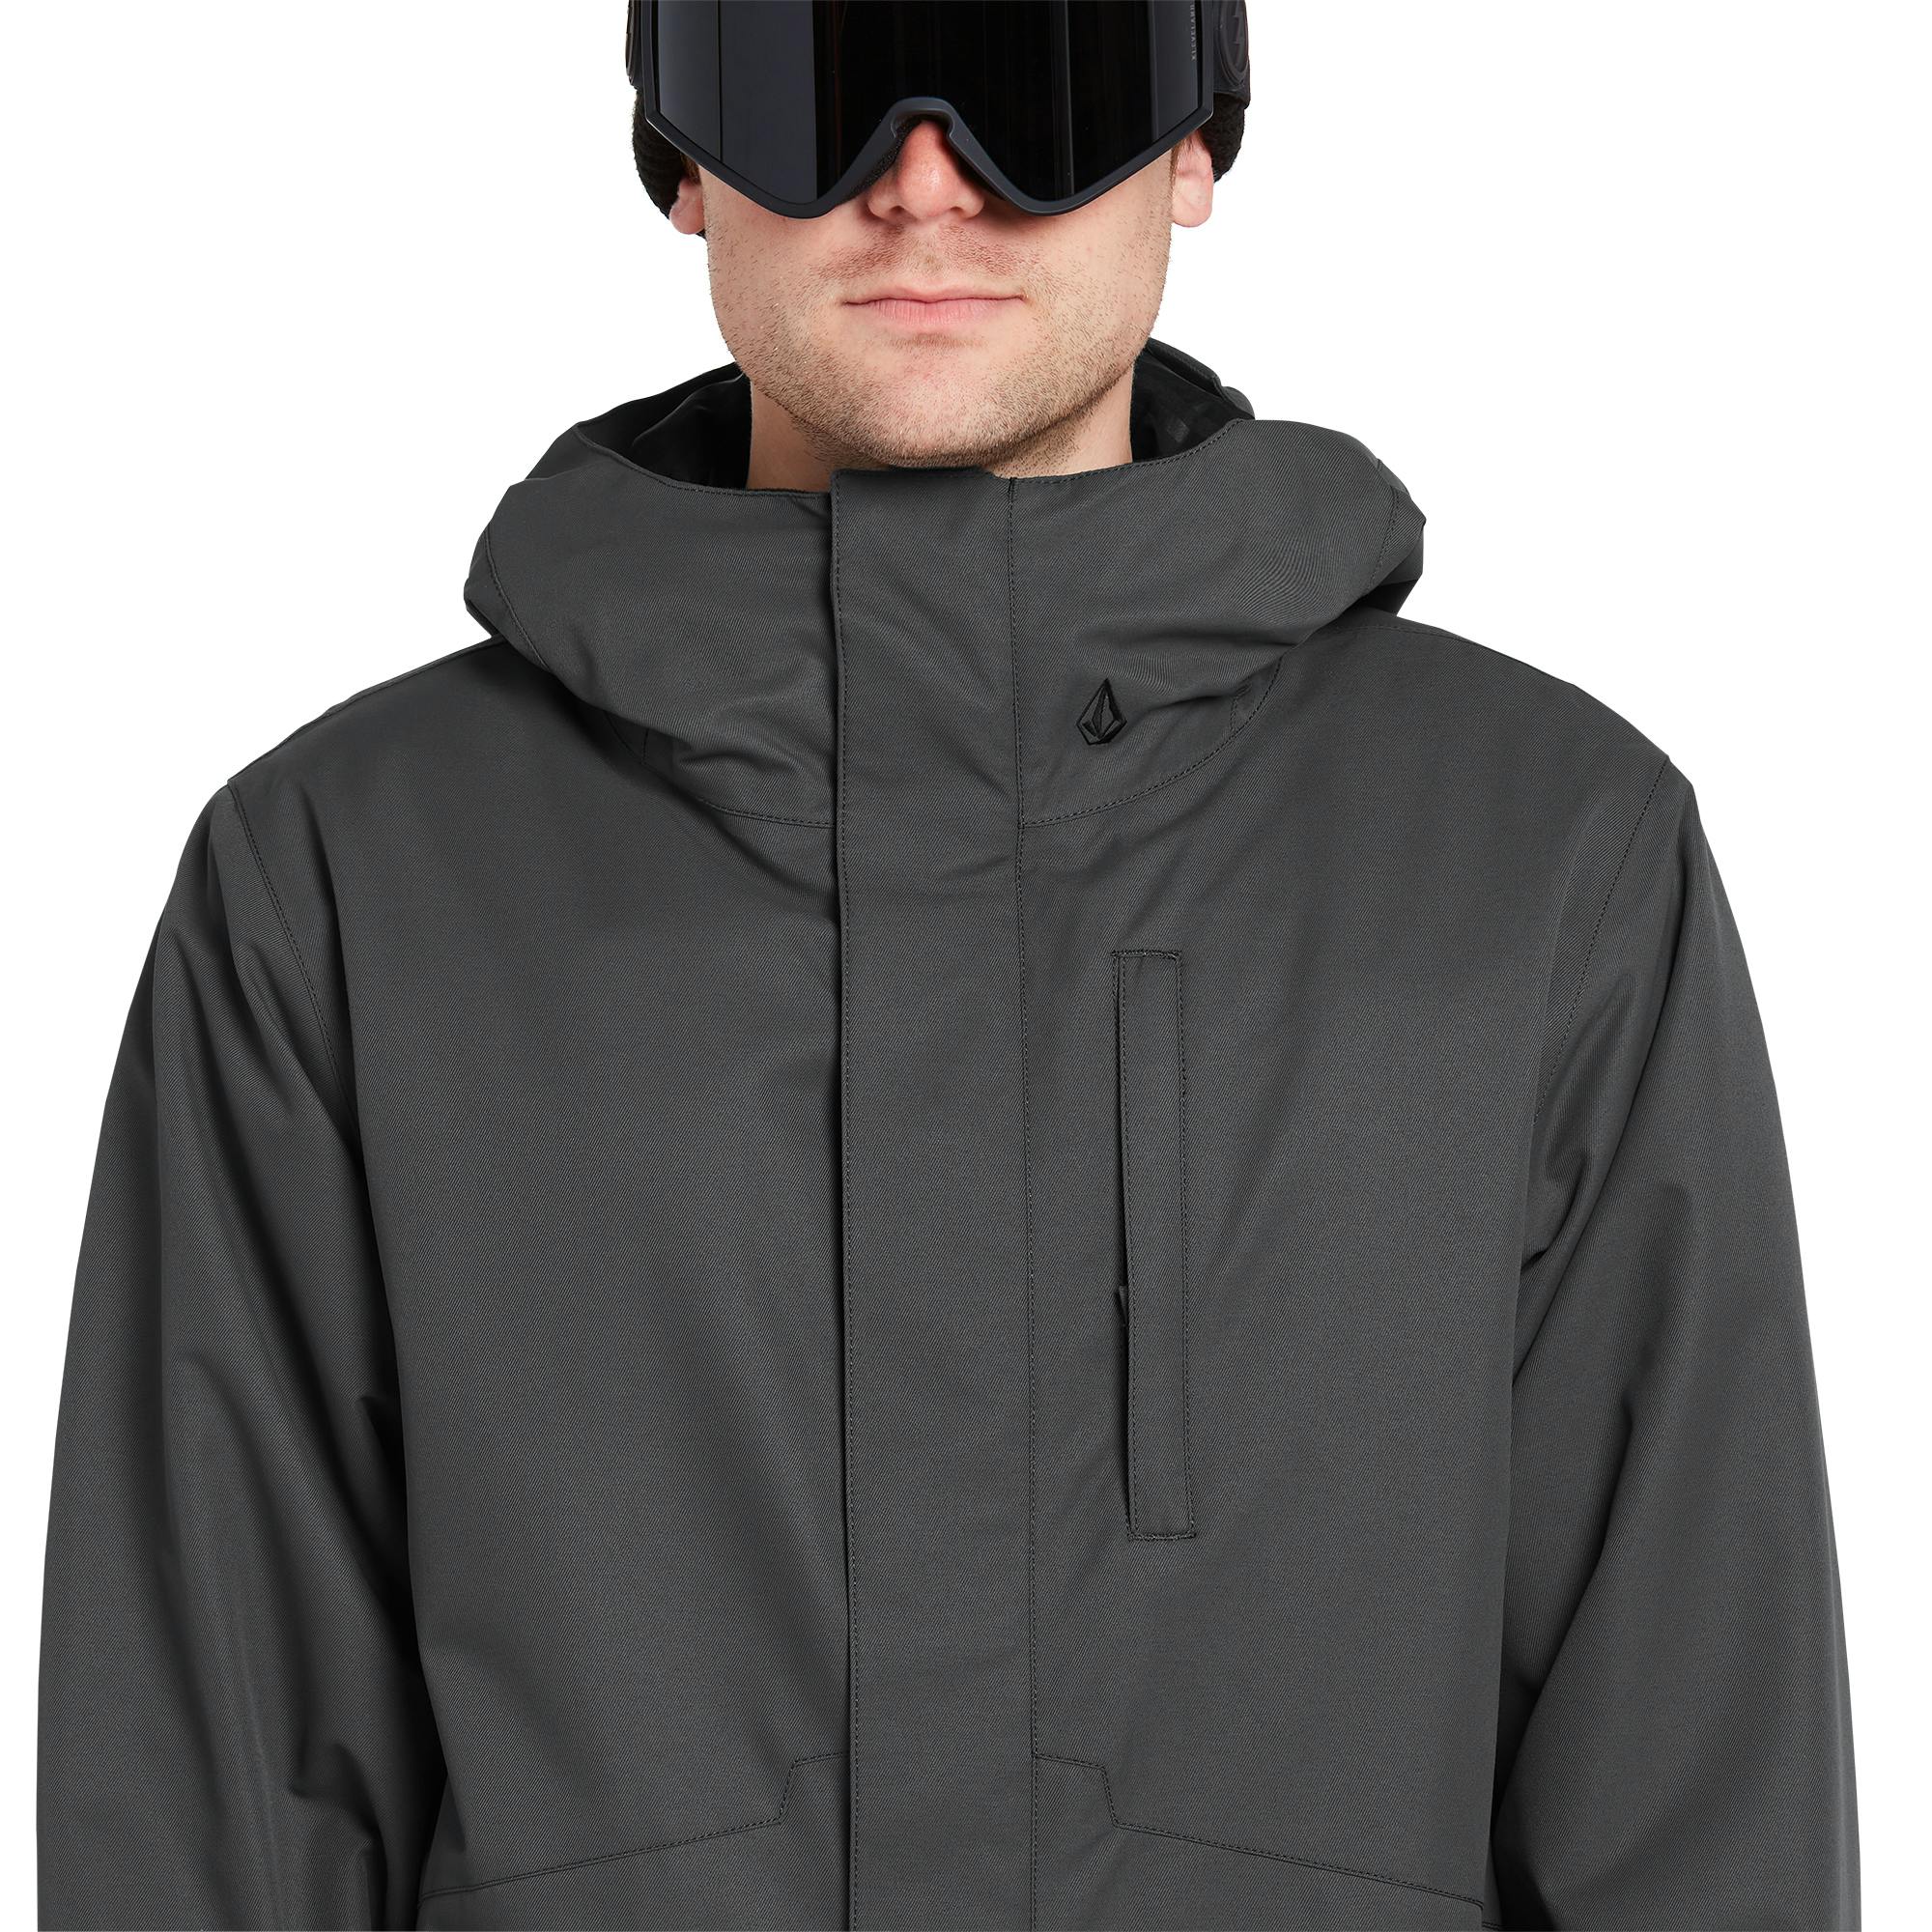 Volcom Men's 17Forty Insulated Jacket